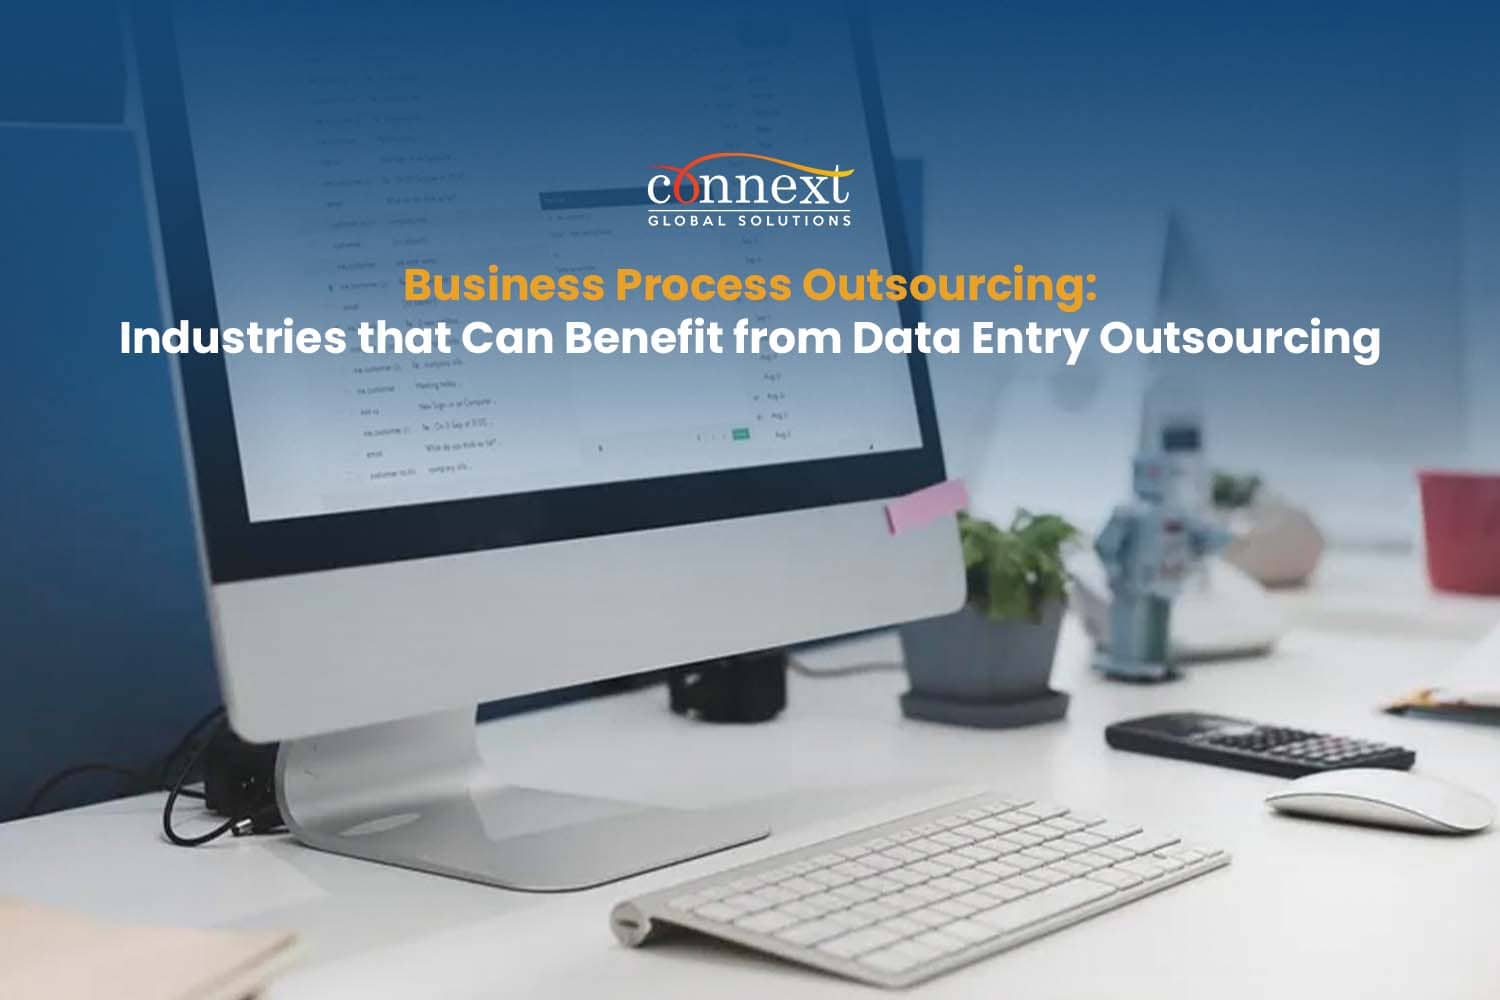 Business Process Outsourcing: Industries that Can Benefit from Data Entry Outsourcing  